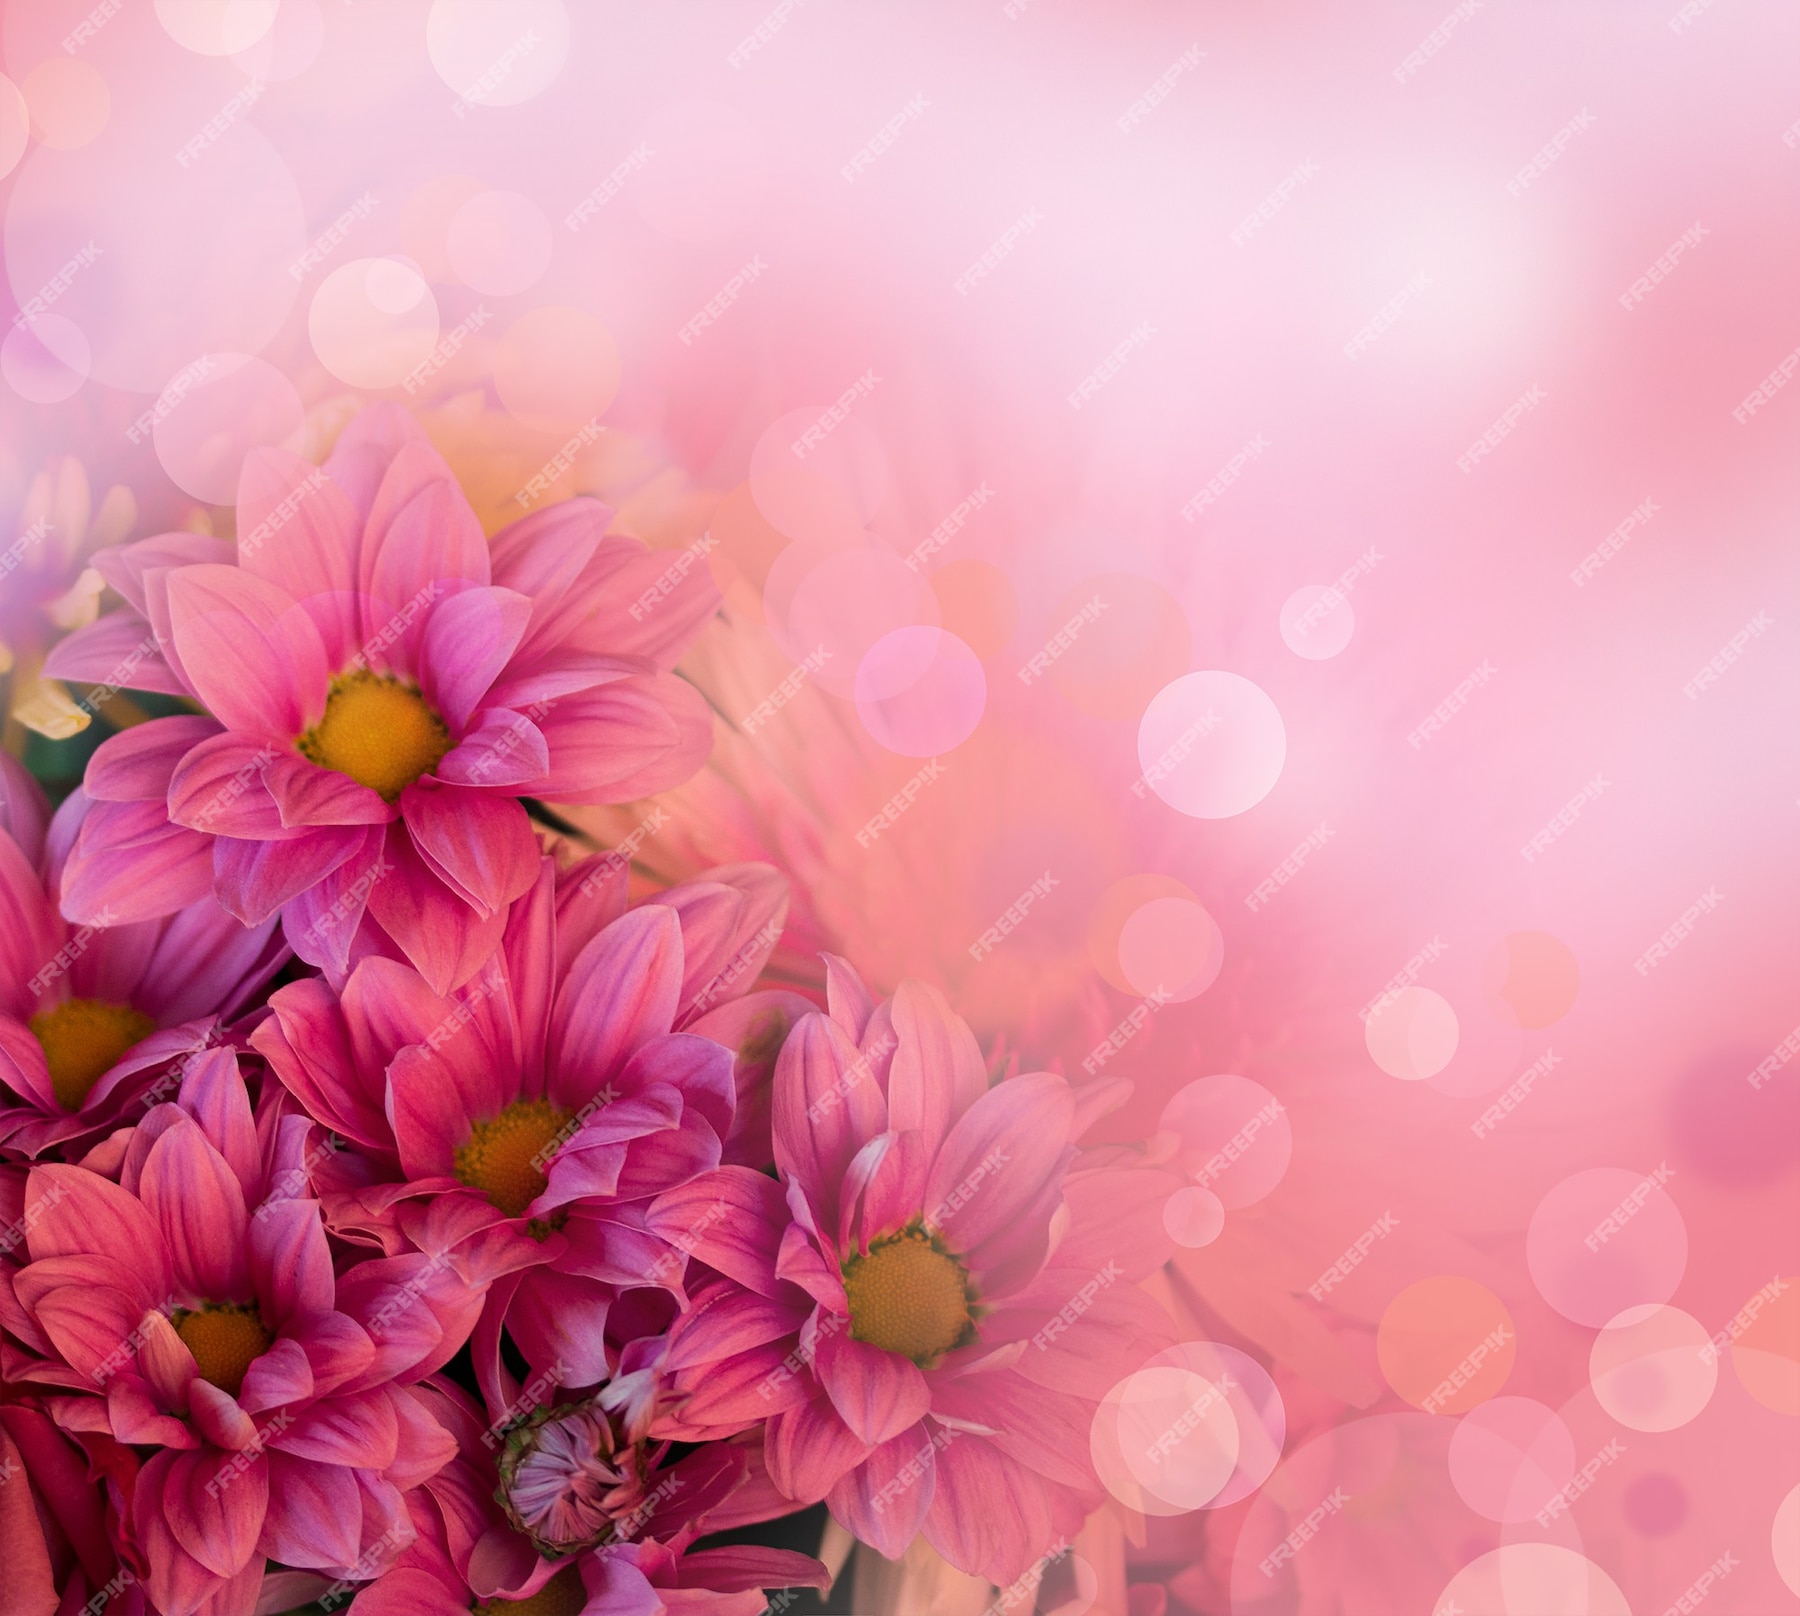 Premium Photo | Spring background with pink flowers